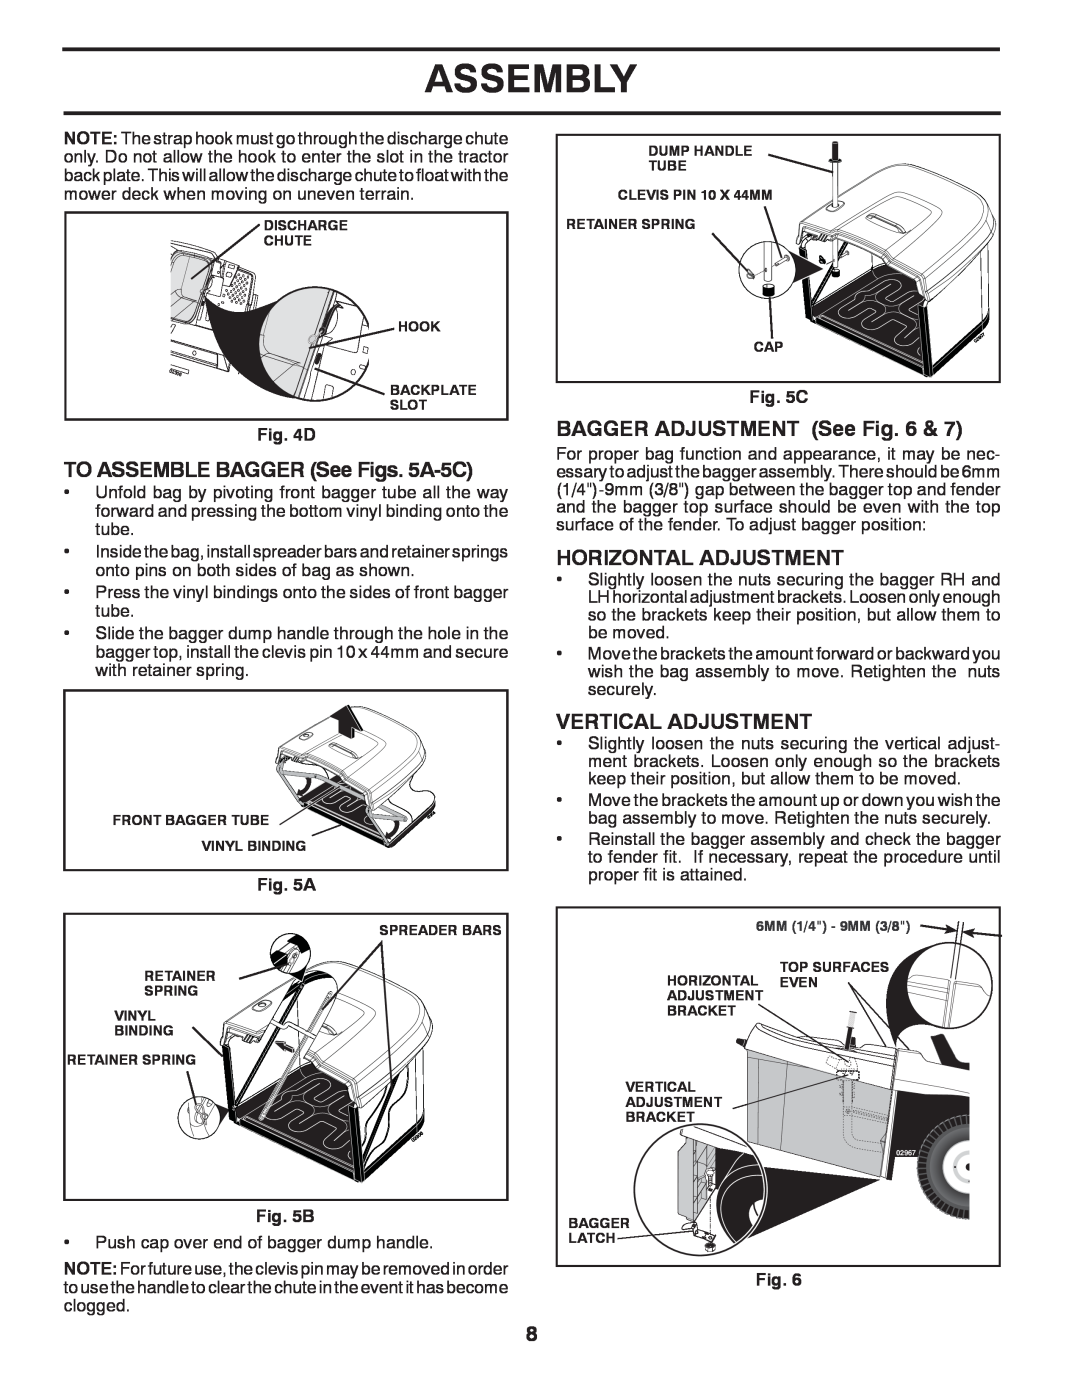 Jonsered LT2220 CMA2 manual TO ASSEMBLE BAGGER See Figs. 5A-5C, BAGGER ADJUSTMENT See Fig, Horizontal Adjustment, Assembly 